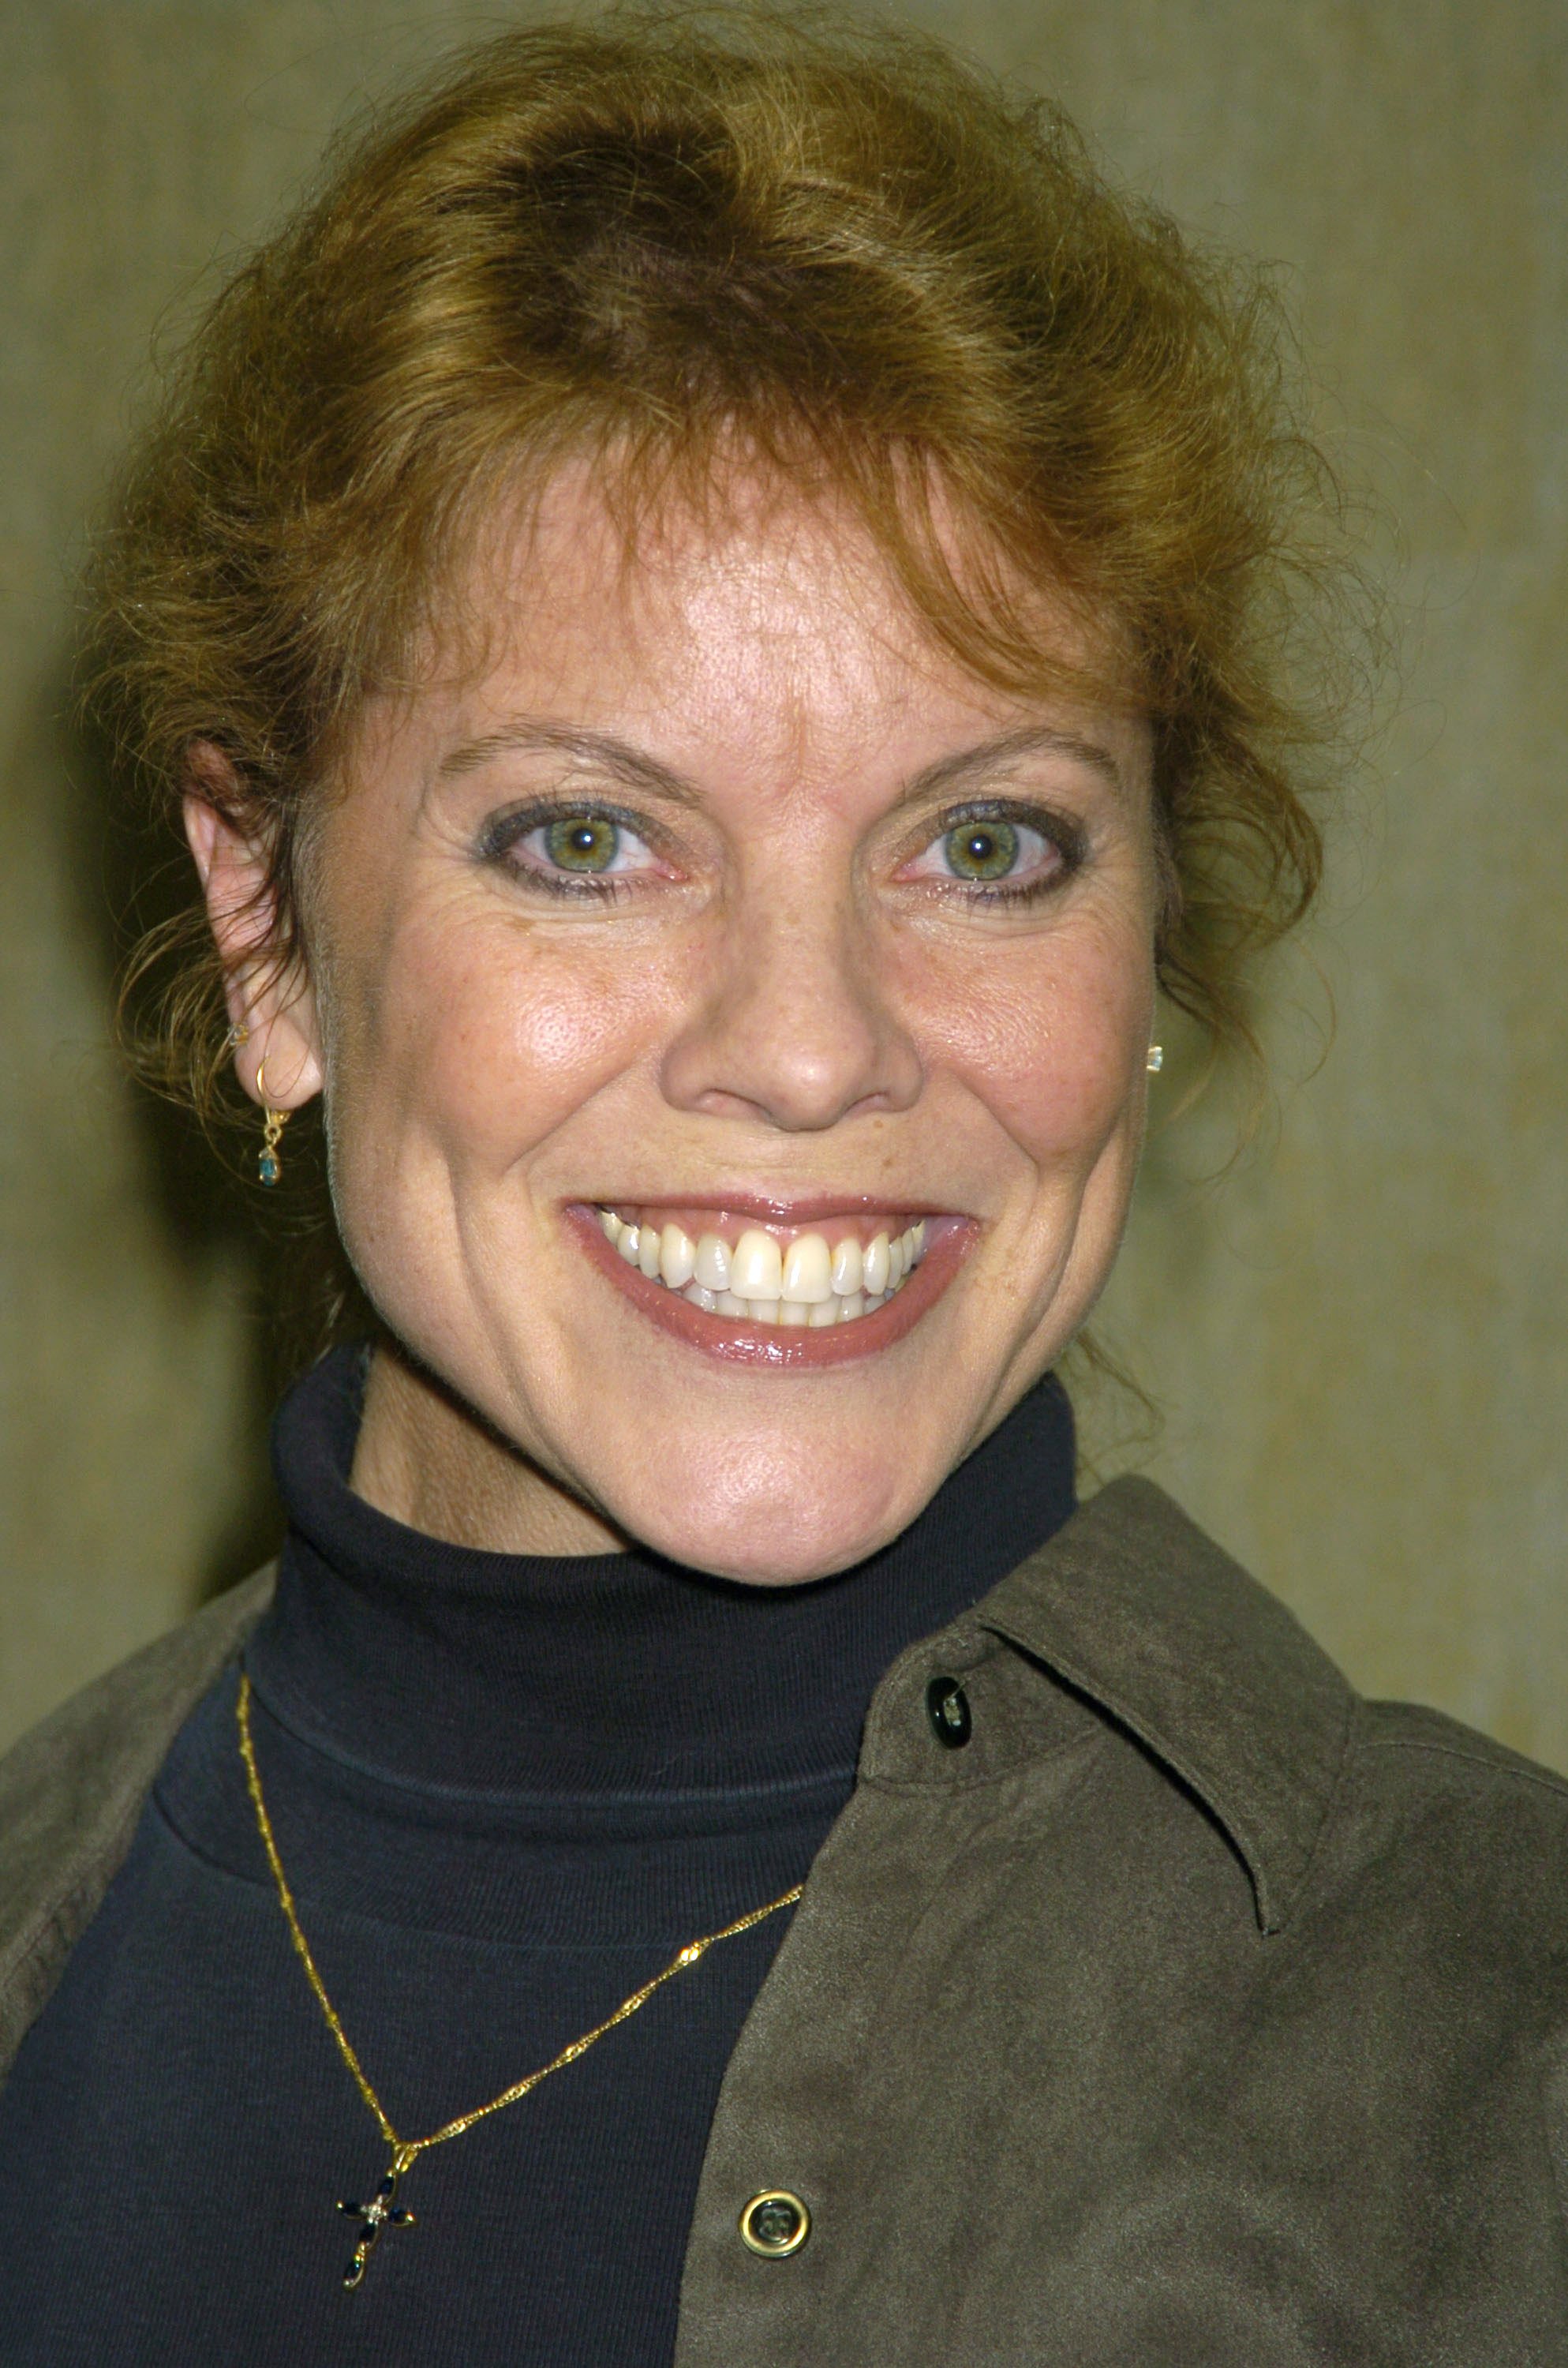 Erin Moran during Mike Carbonaros Big Apple Comic Book, Art and Toy Show Press Conference - January 21, 2005 at Penn Plaza Pavilion in New York City, New York, United States | Source: Getty Images 